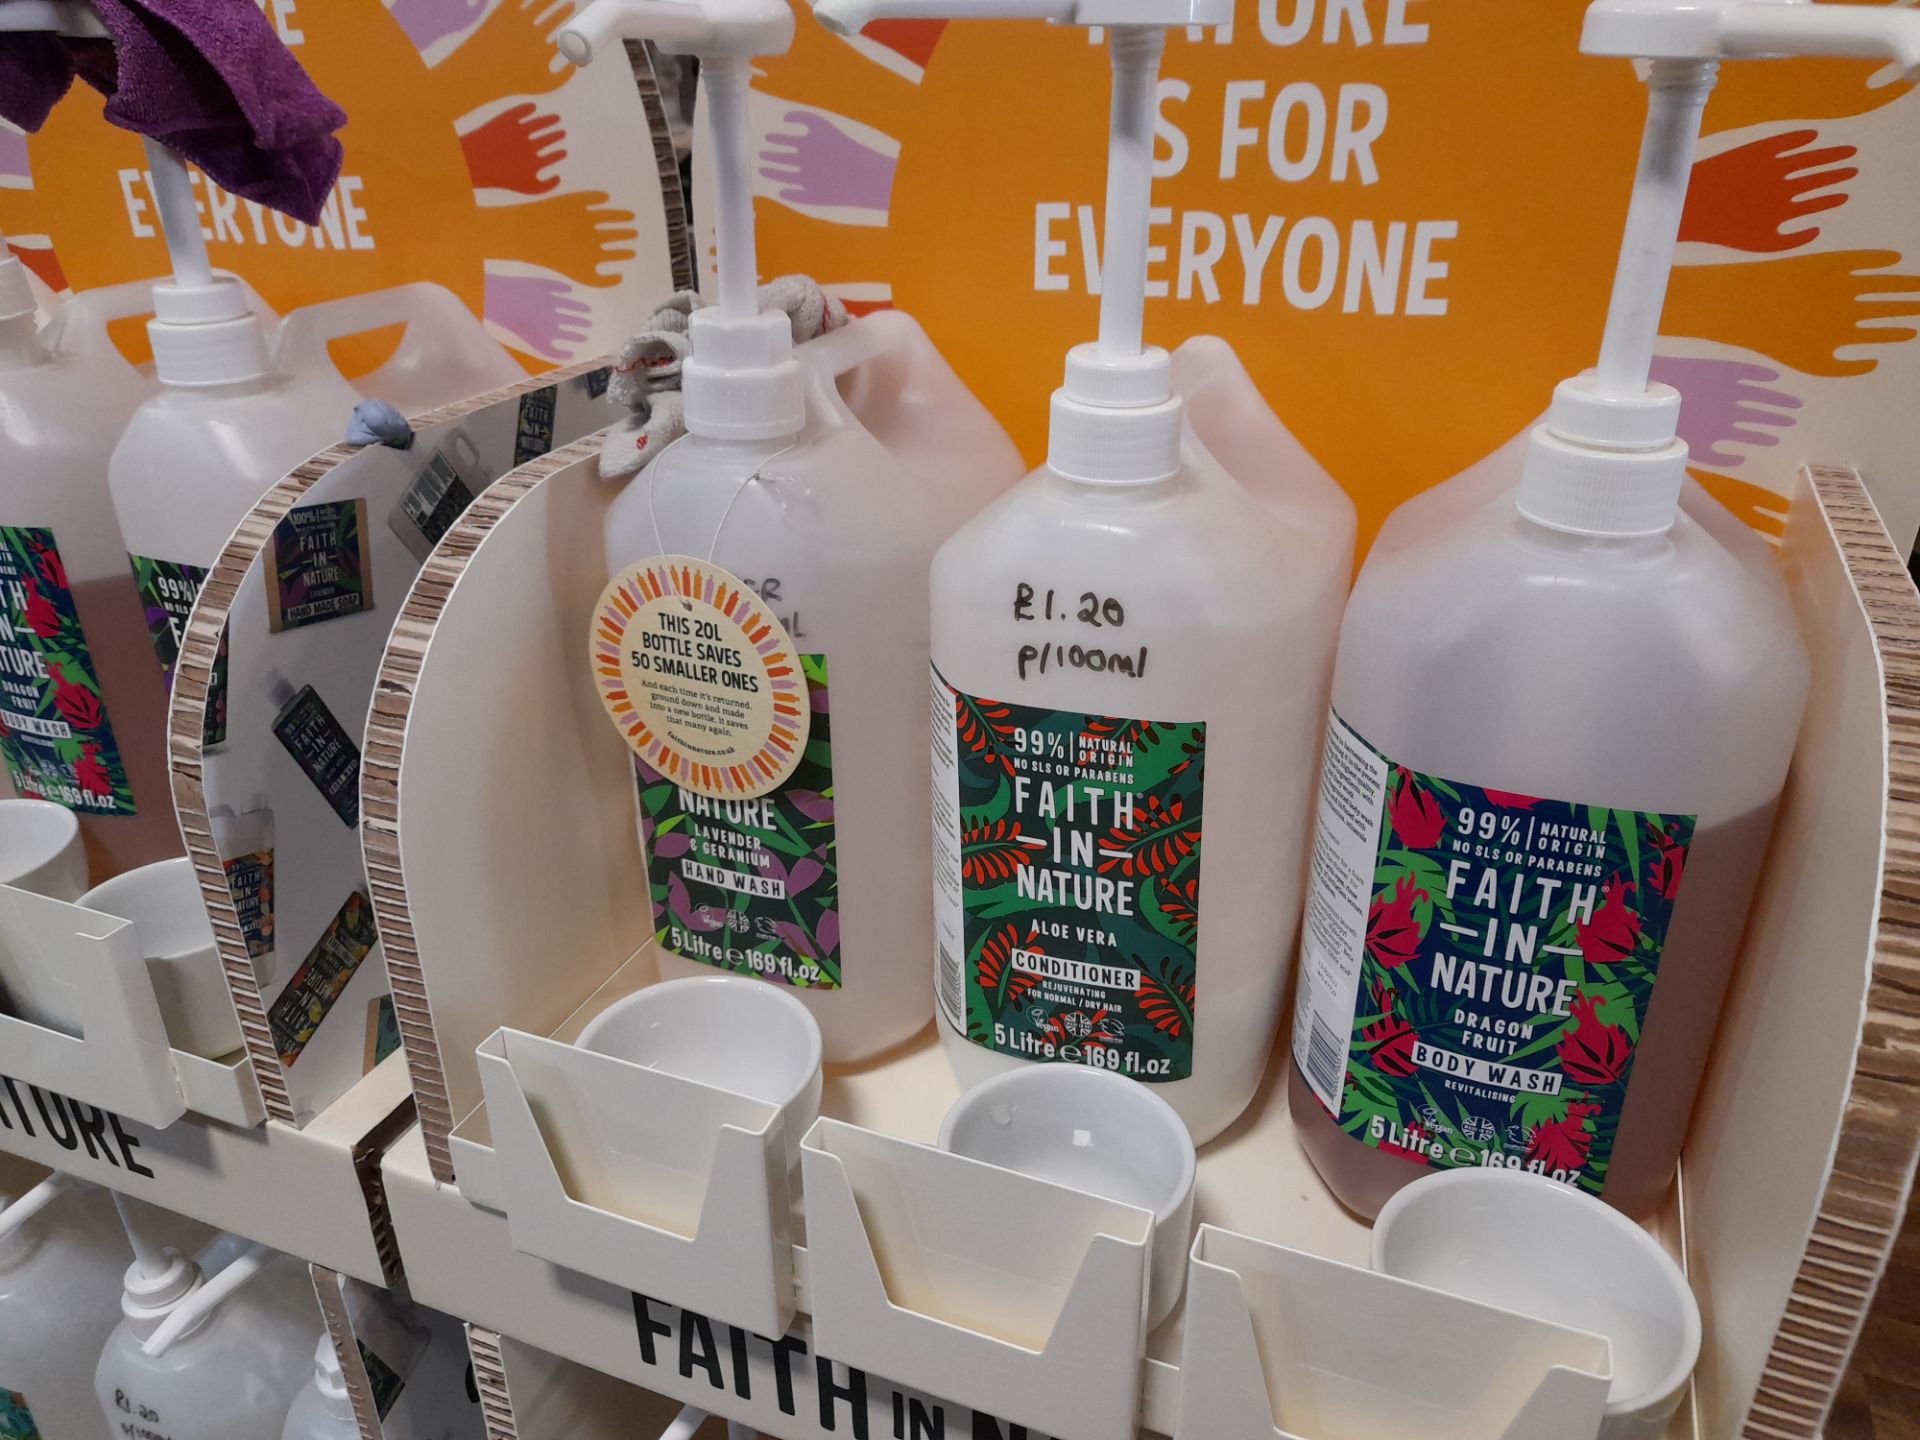 2x Faith in Nature Display Stands with 19x part opened Faith in Nature shampoos, conditioners, - Image 2 of 7